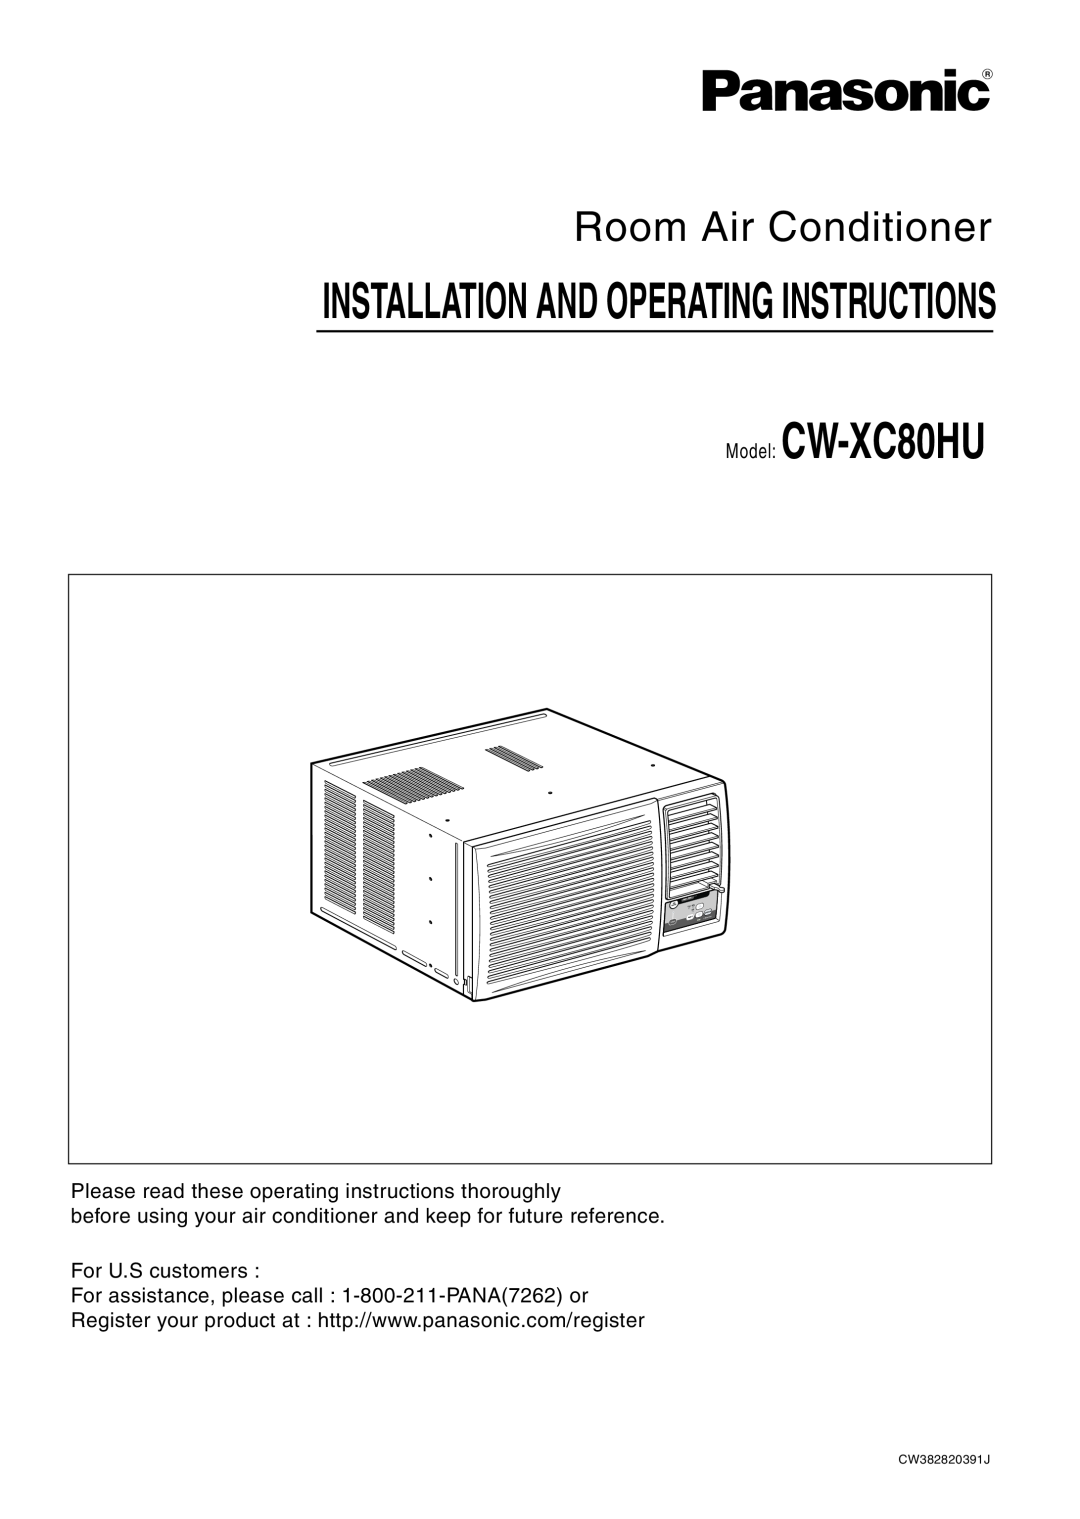 Panasonic manual Model CW-XC80HU, Room Air Conditioner, Installation And Operating Instructions, CW382820391J 